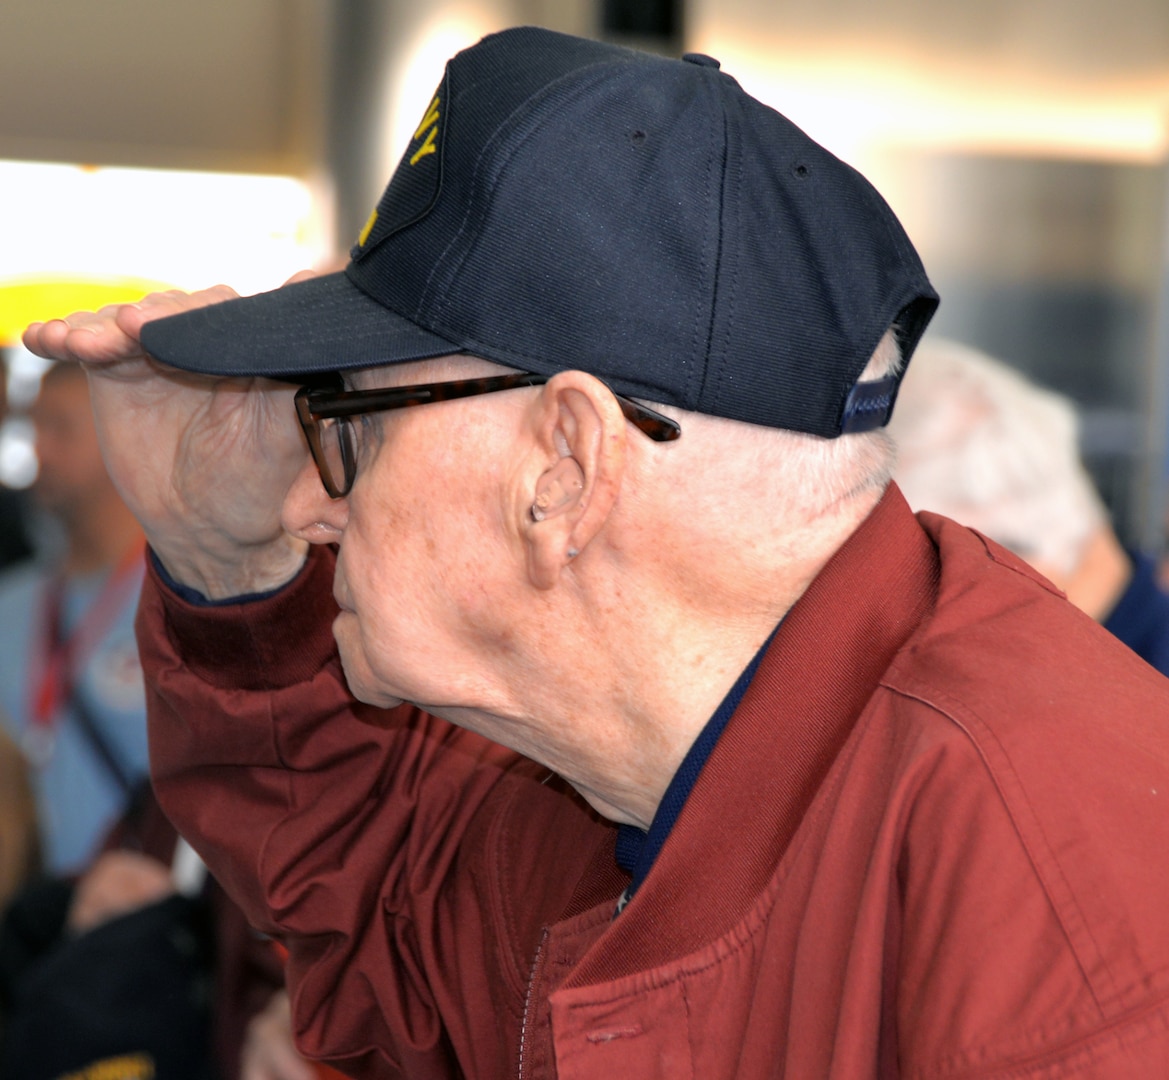 A World War II veteran renders a salute during the singing of the National Anthem at the conclusion of a sendoff ceremony at the San Antonio International Airport Oct. 17 which saw 40 WWII veterans take off for a trip to New Orleans to visit the National World War II Museum. The Soaring Valor program, sponsored by the Gary Sinise Foundation, helped send the veterans and 40 high school Student companions from Dallas, to the museum.